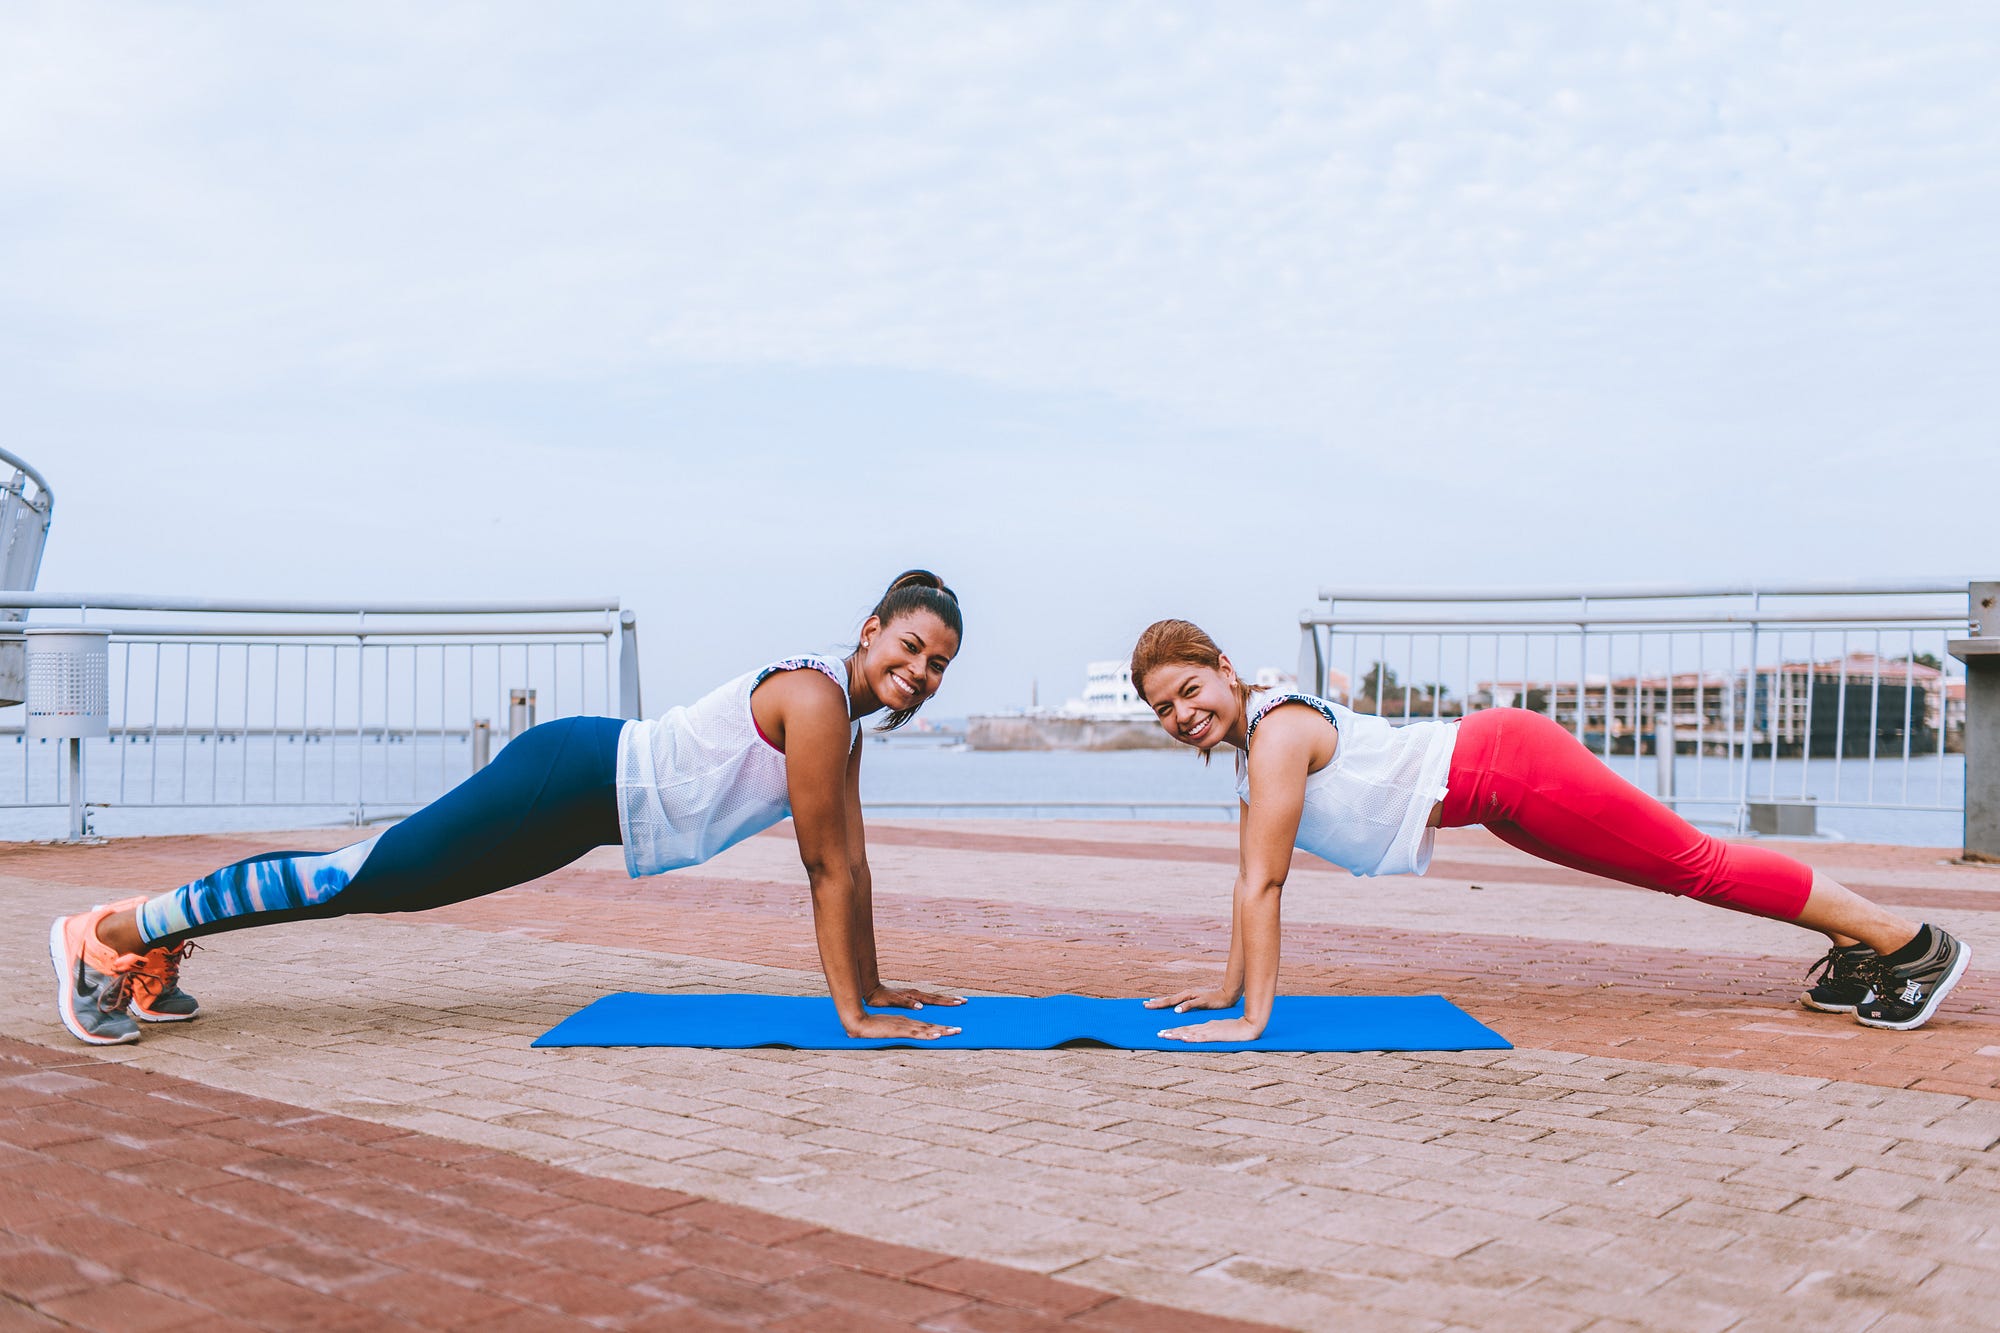 The Benefits of Yoga for Runners